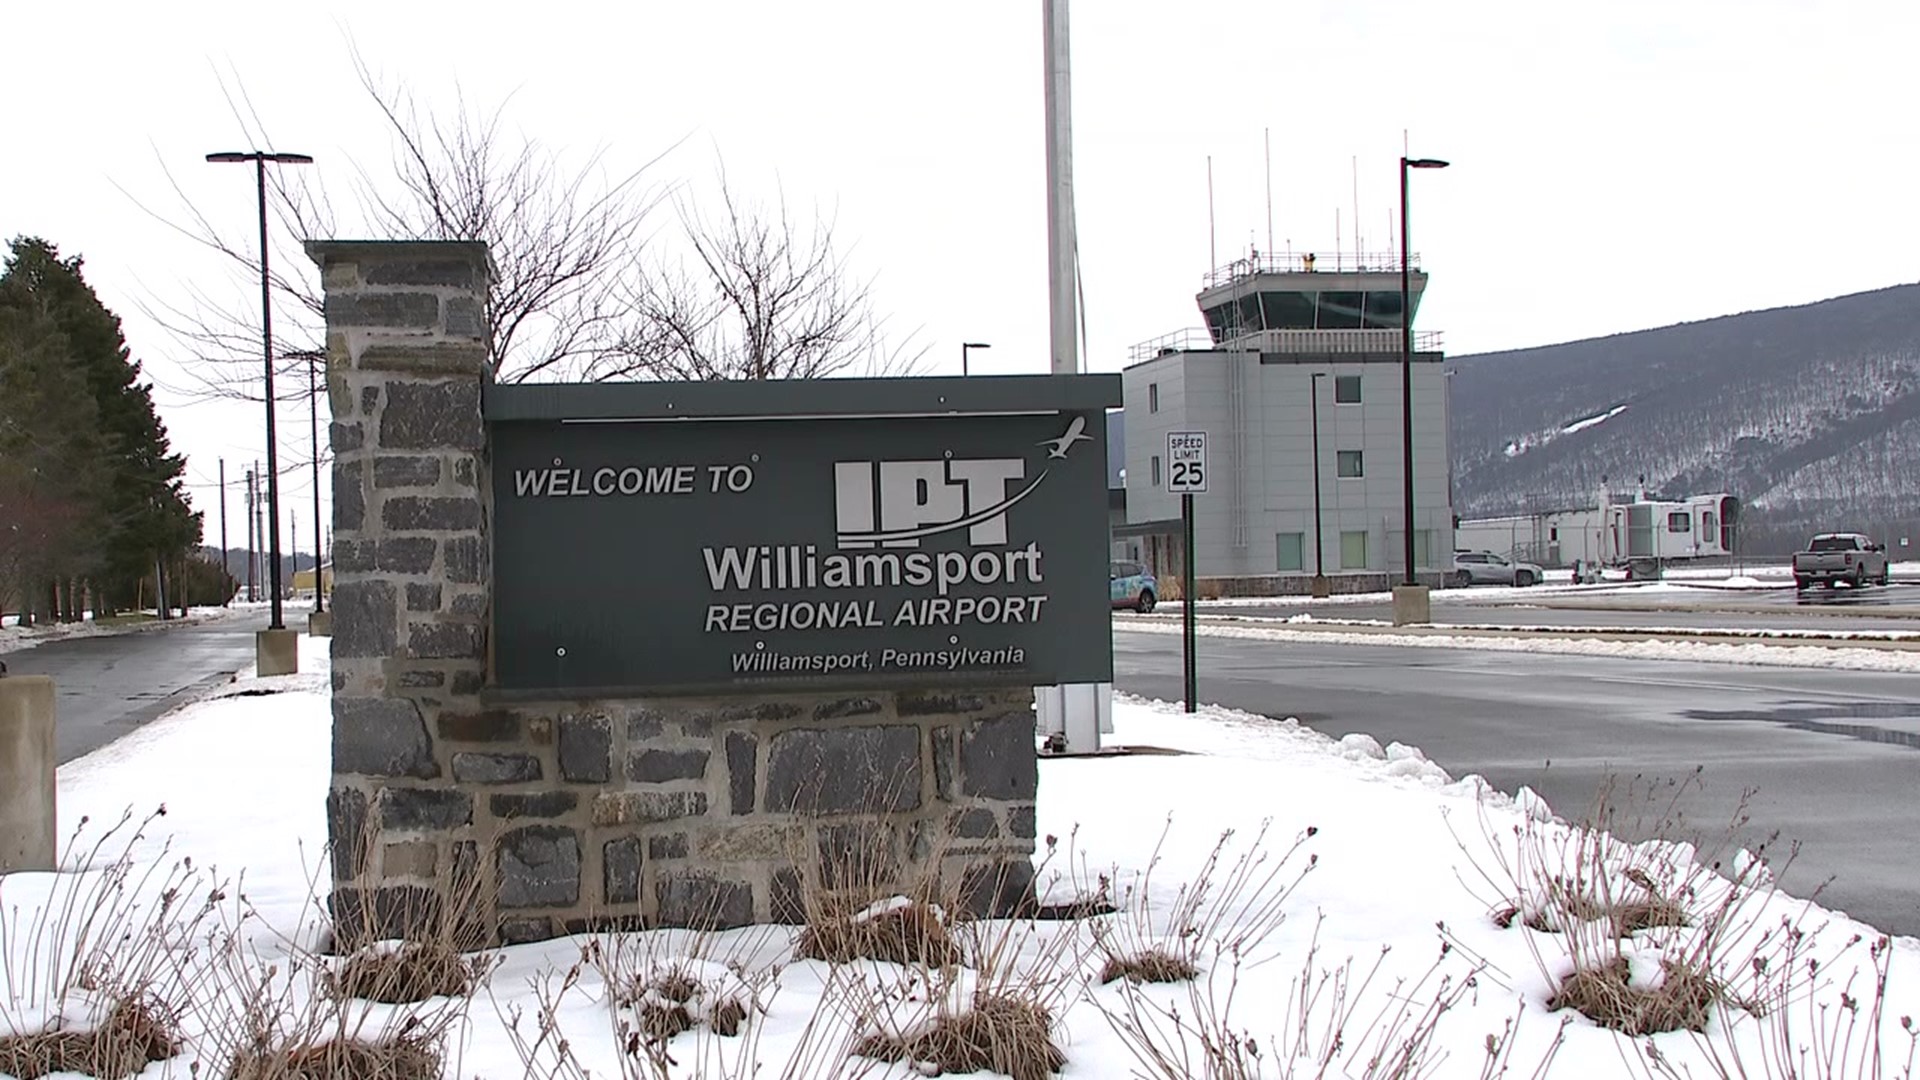 Southern Airways Express announced it will fly in and out of Williamsport Regional Airport starting this spring.